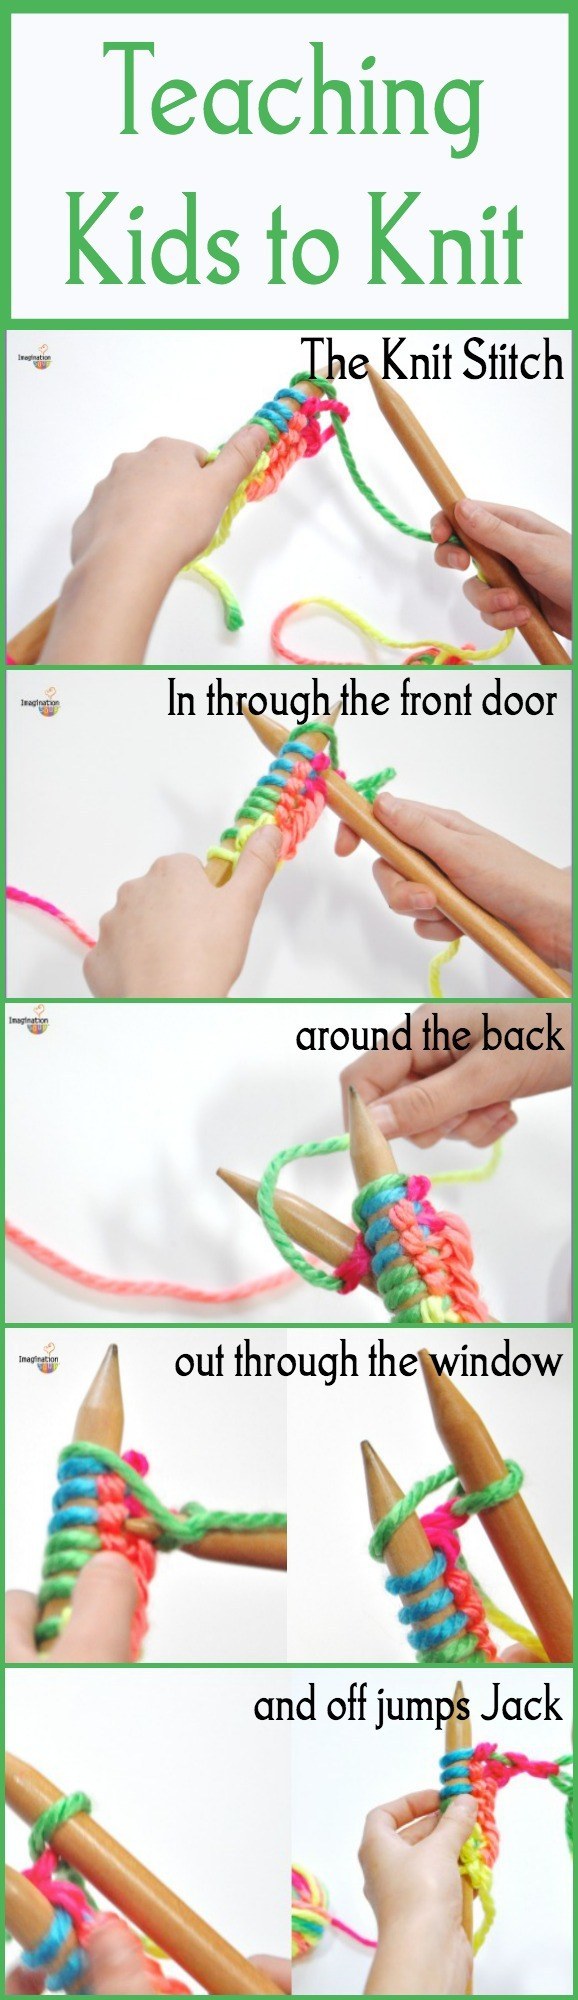 For teaching your kids how to knit with you.